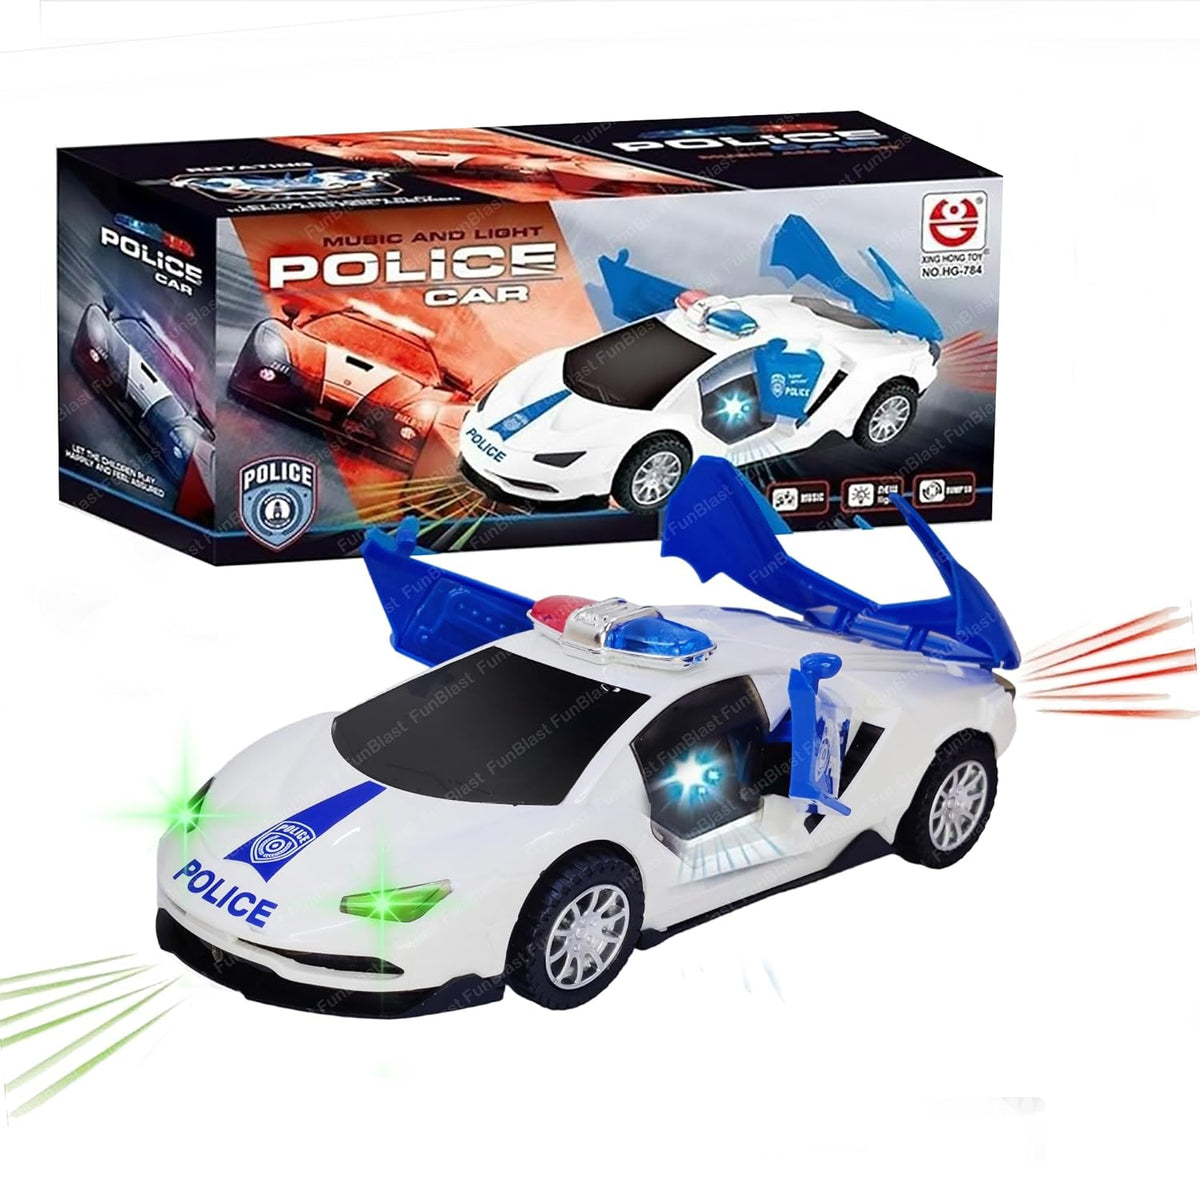 Police Car Toy, Car Toy for Kids with 360 Degree Rotation & Door Opening Siren Sound, B/O Toy Car, Sound & Light Toys for Kids Boys & Girls - Multicolor